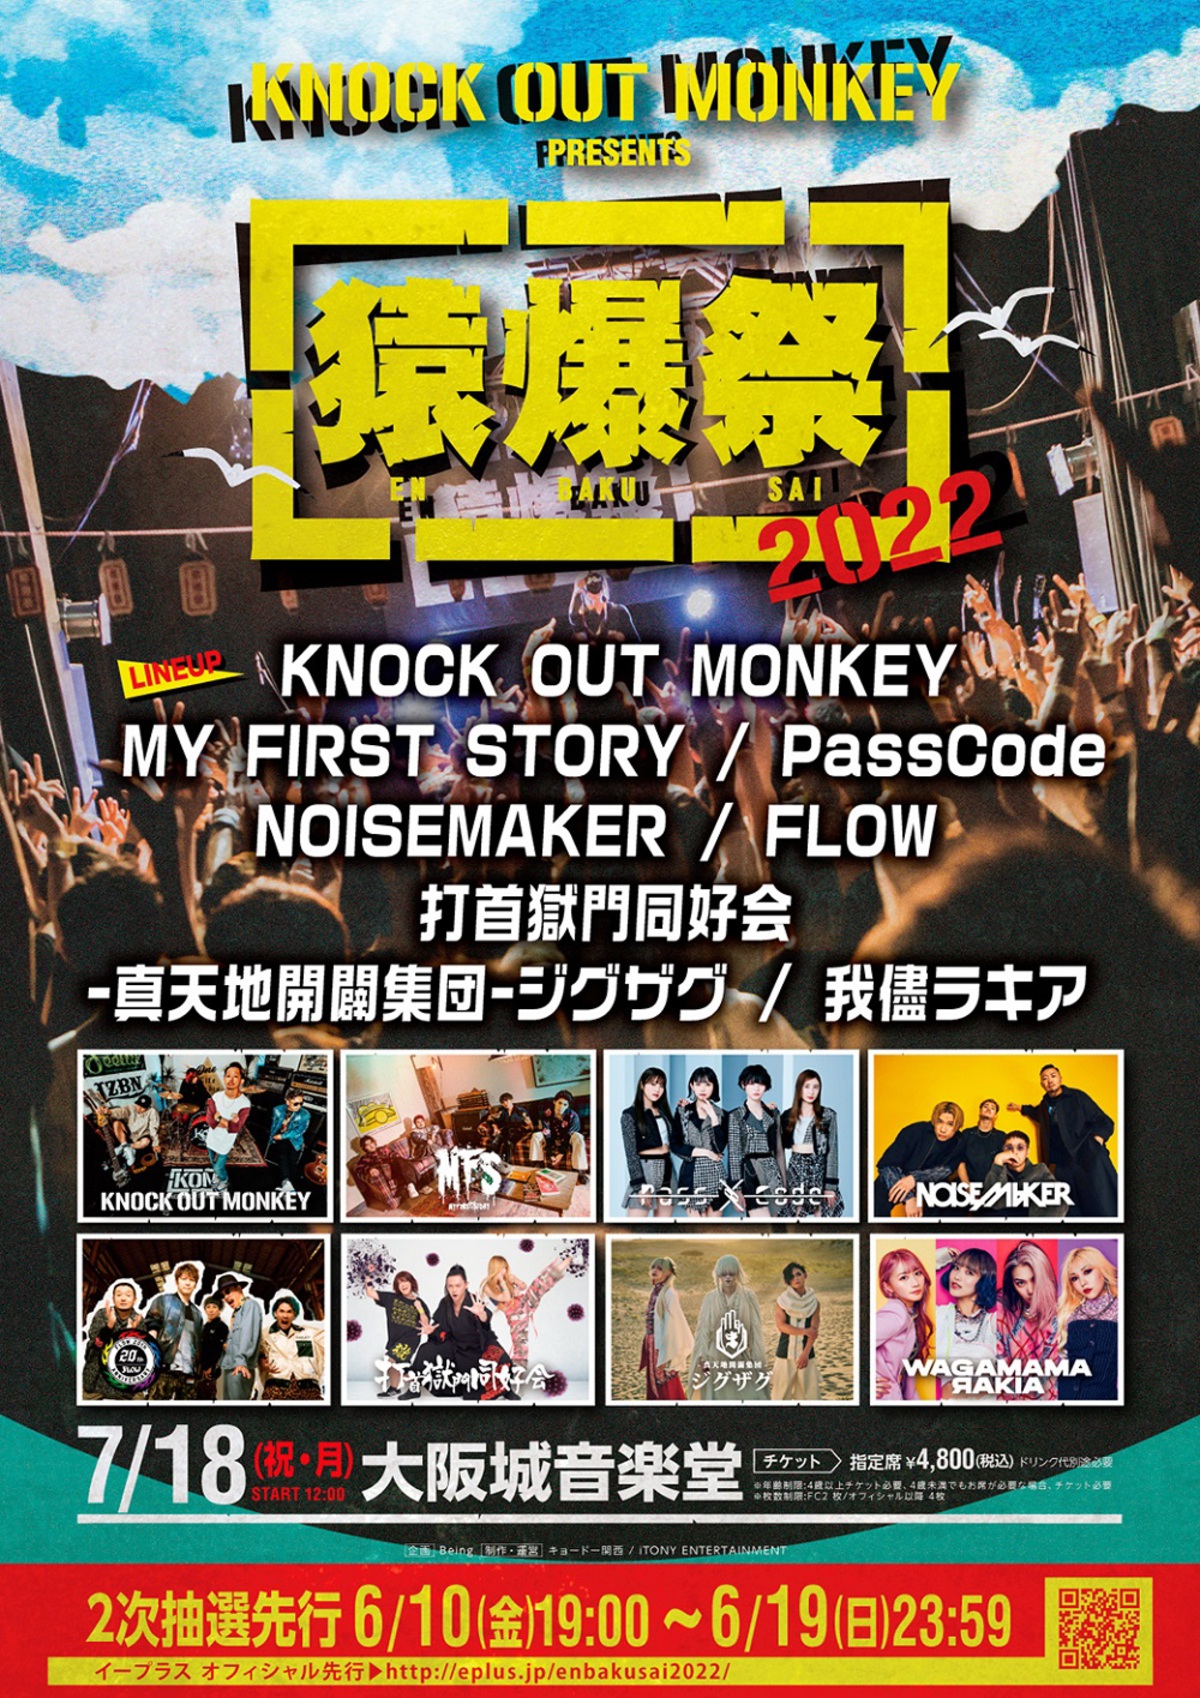 KNOCK OUT MONKEY、主催イベント